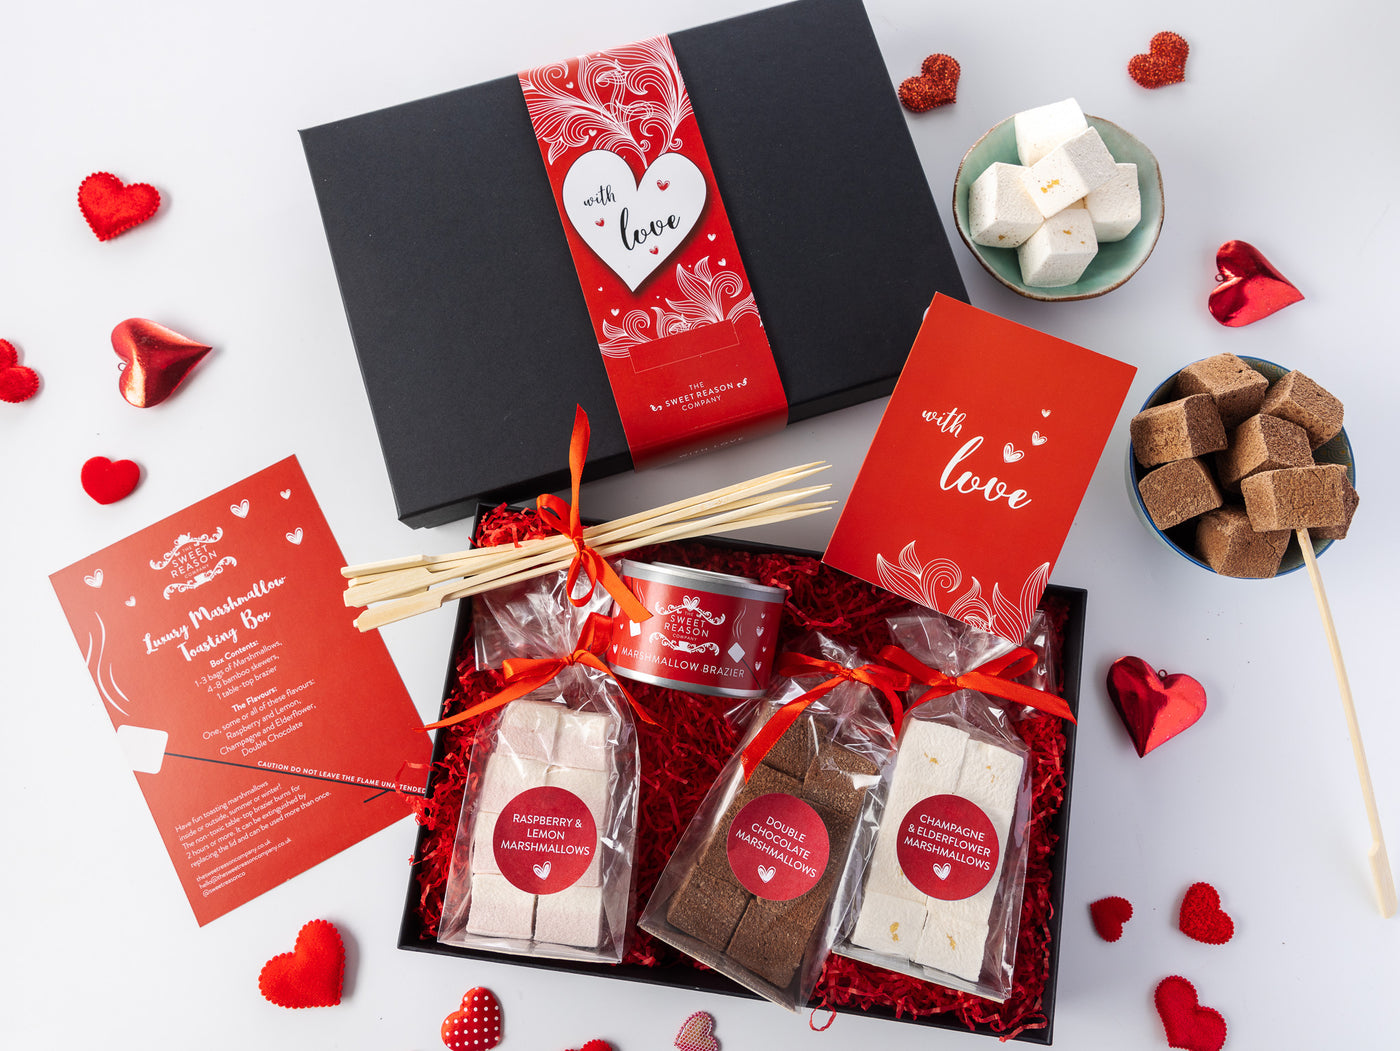 'With Love' Marshmallow Ultimate Toasting Box